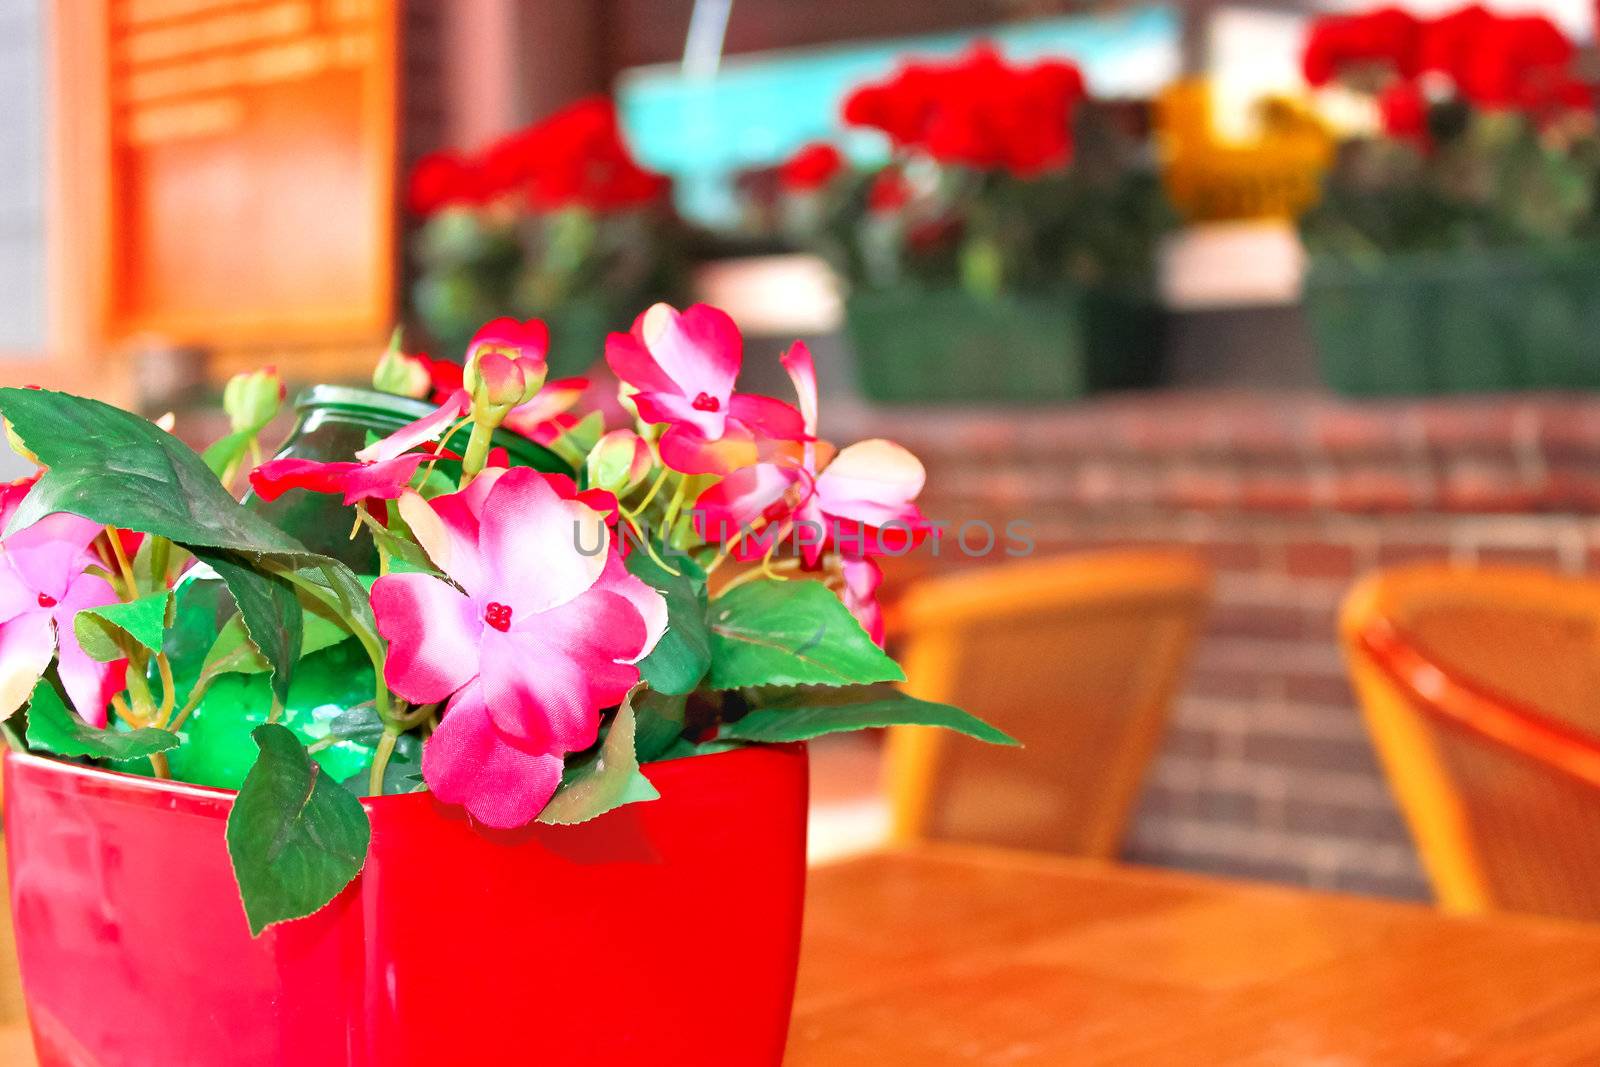 Flowers on the table in a cafe by NickNick